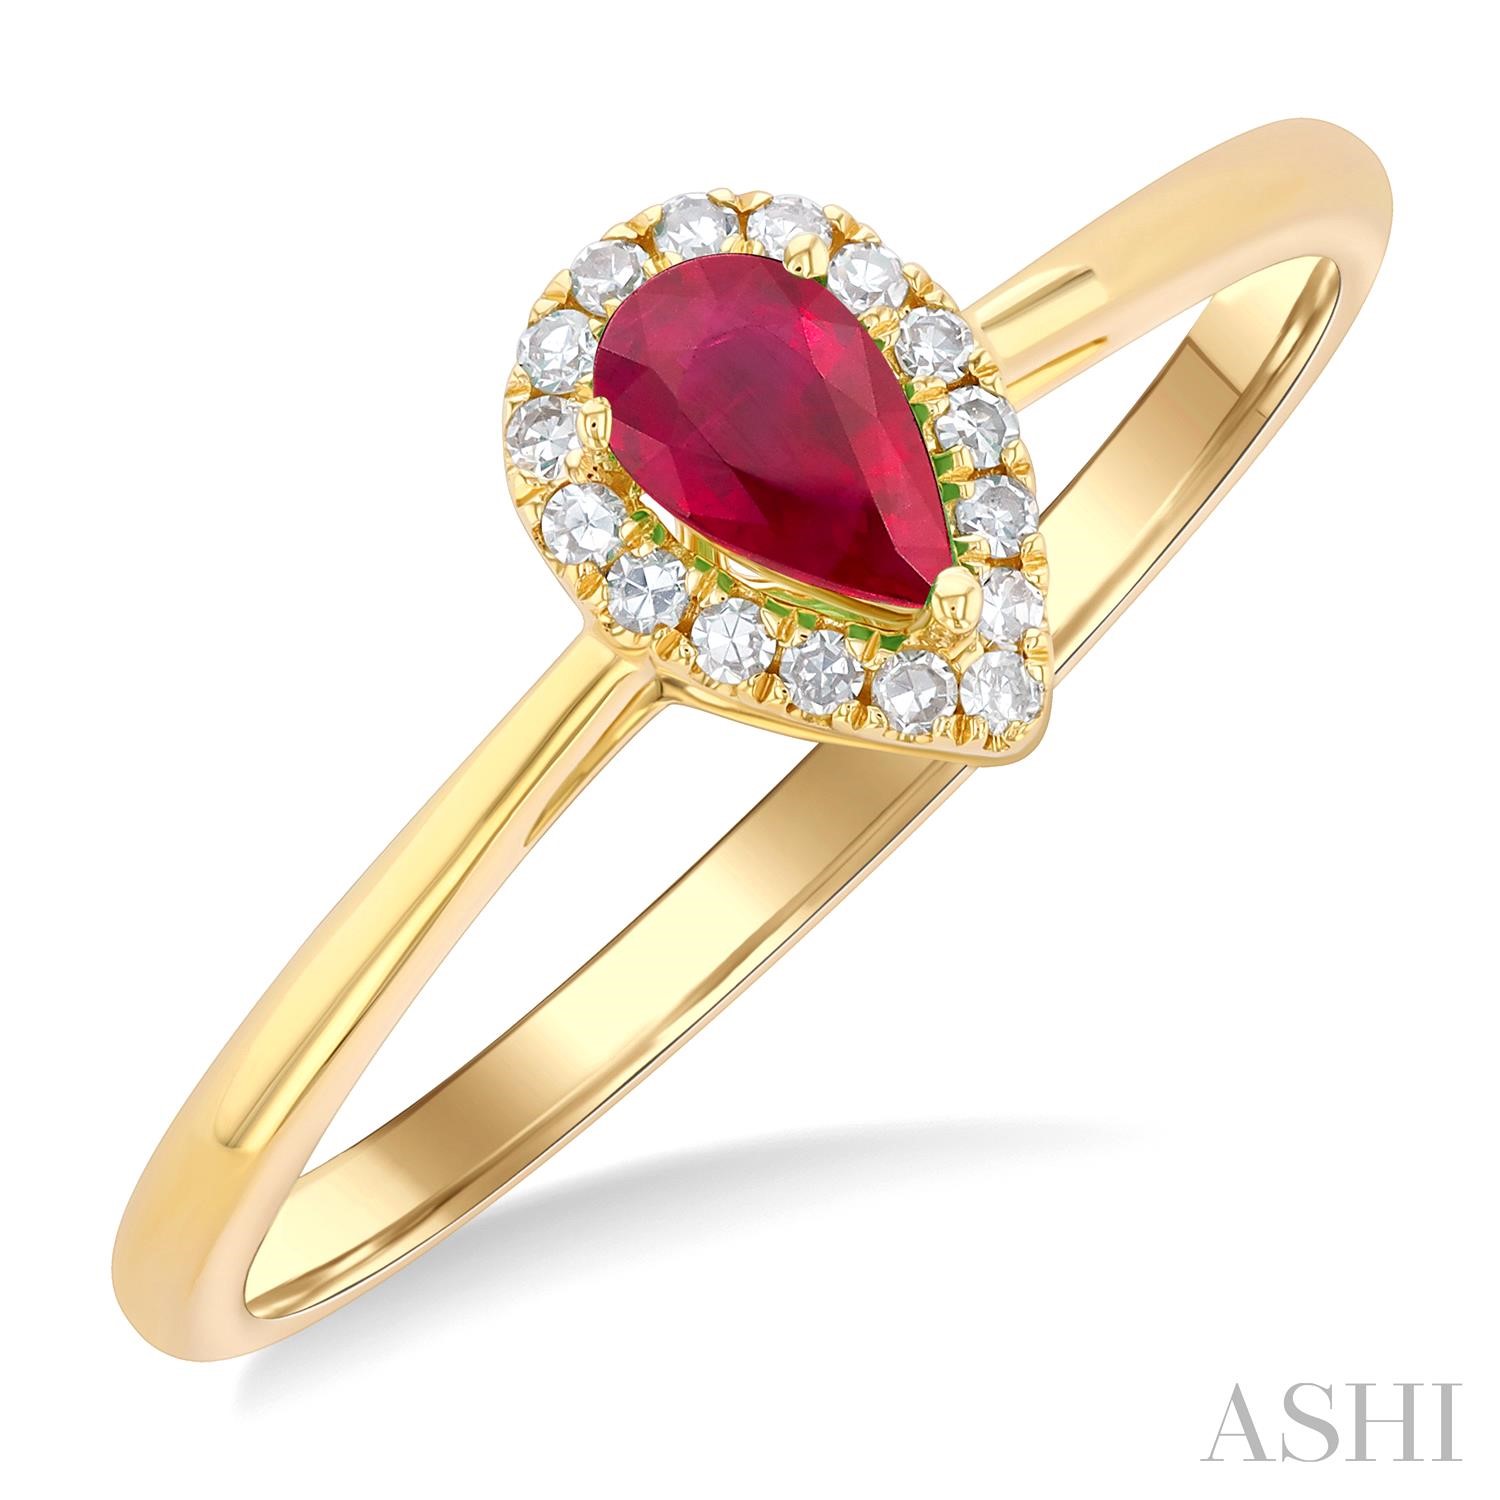 10 Karat Yellow Gold Ring With 5X3mm Pear Shape Ruby And Diamonds 0.06CTW 
Ring Size: 6.5